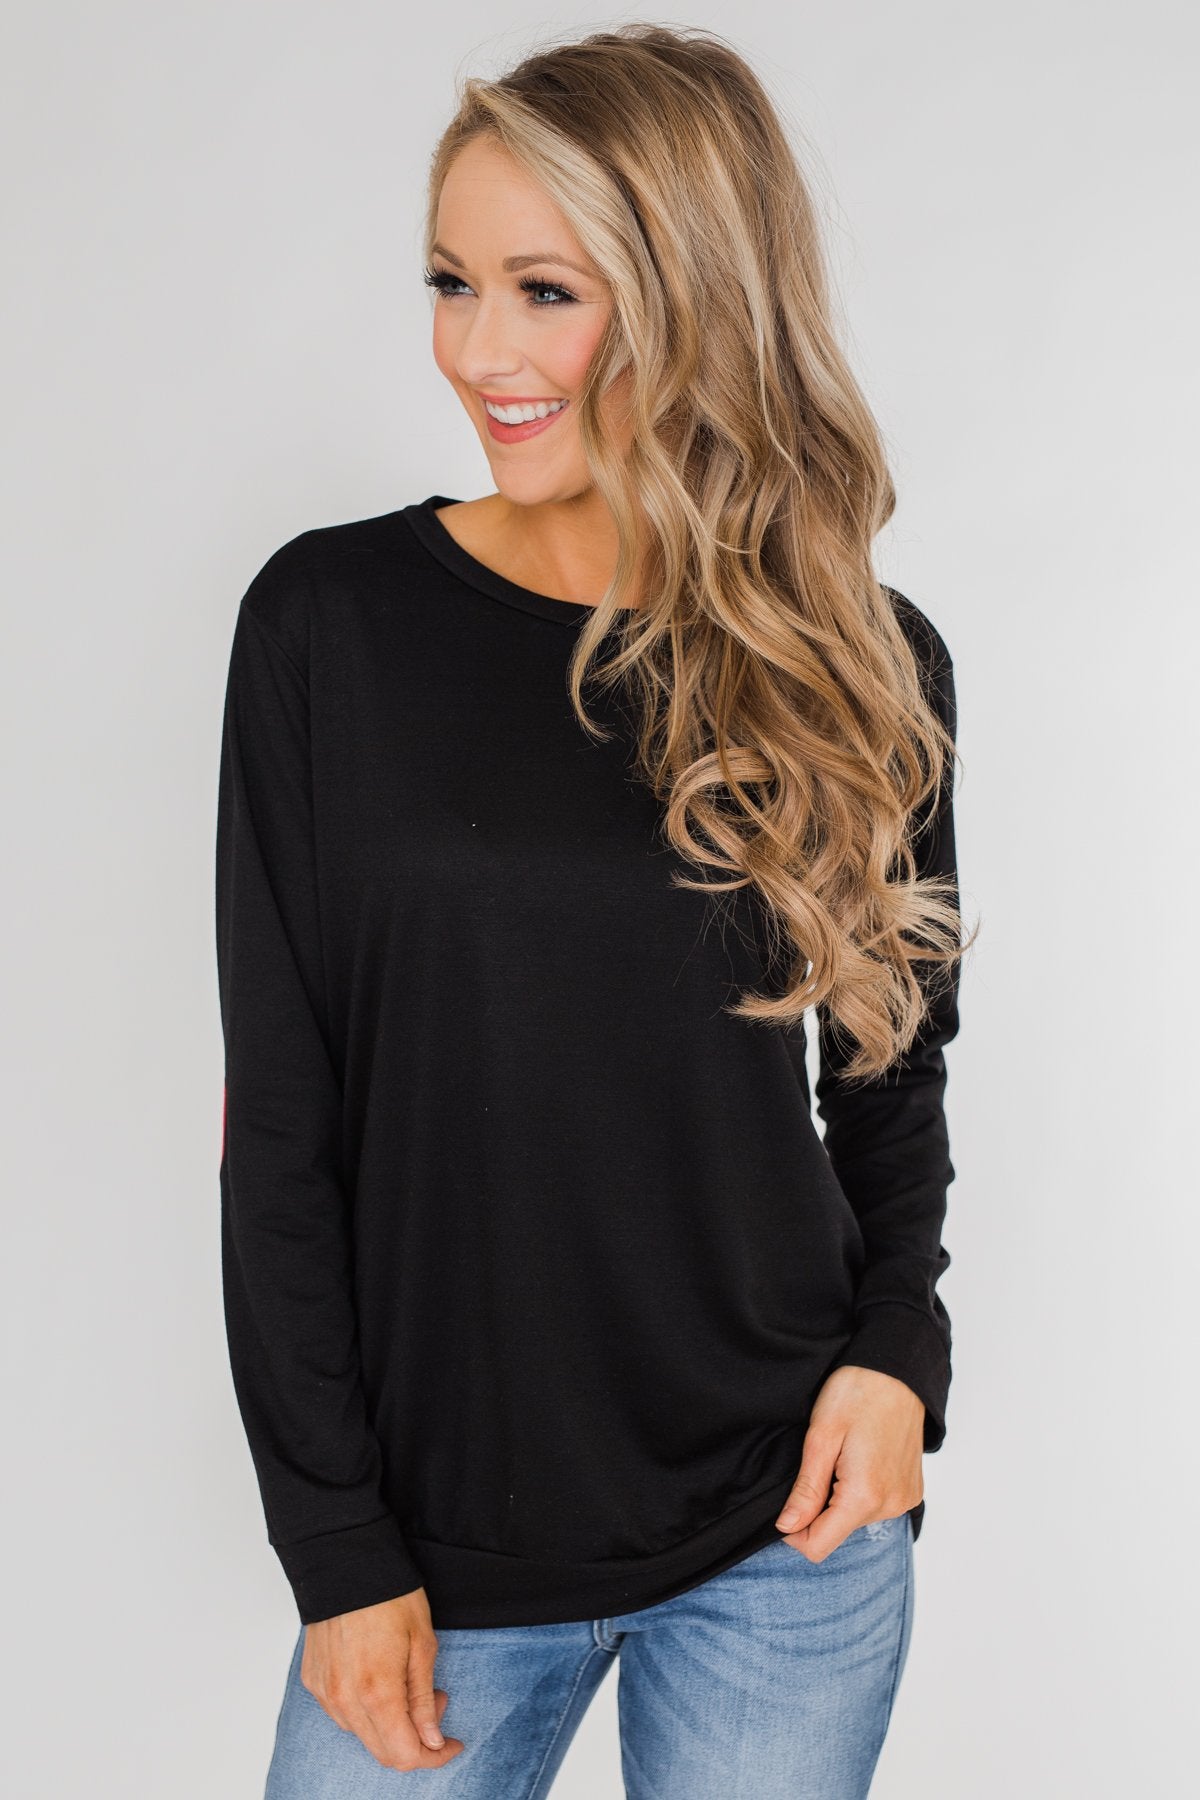 Struck By Love Heart Elbow Patch Top- Black – The Pulse Boutique